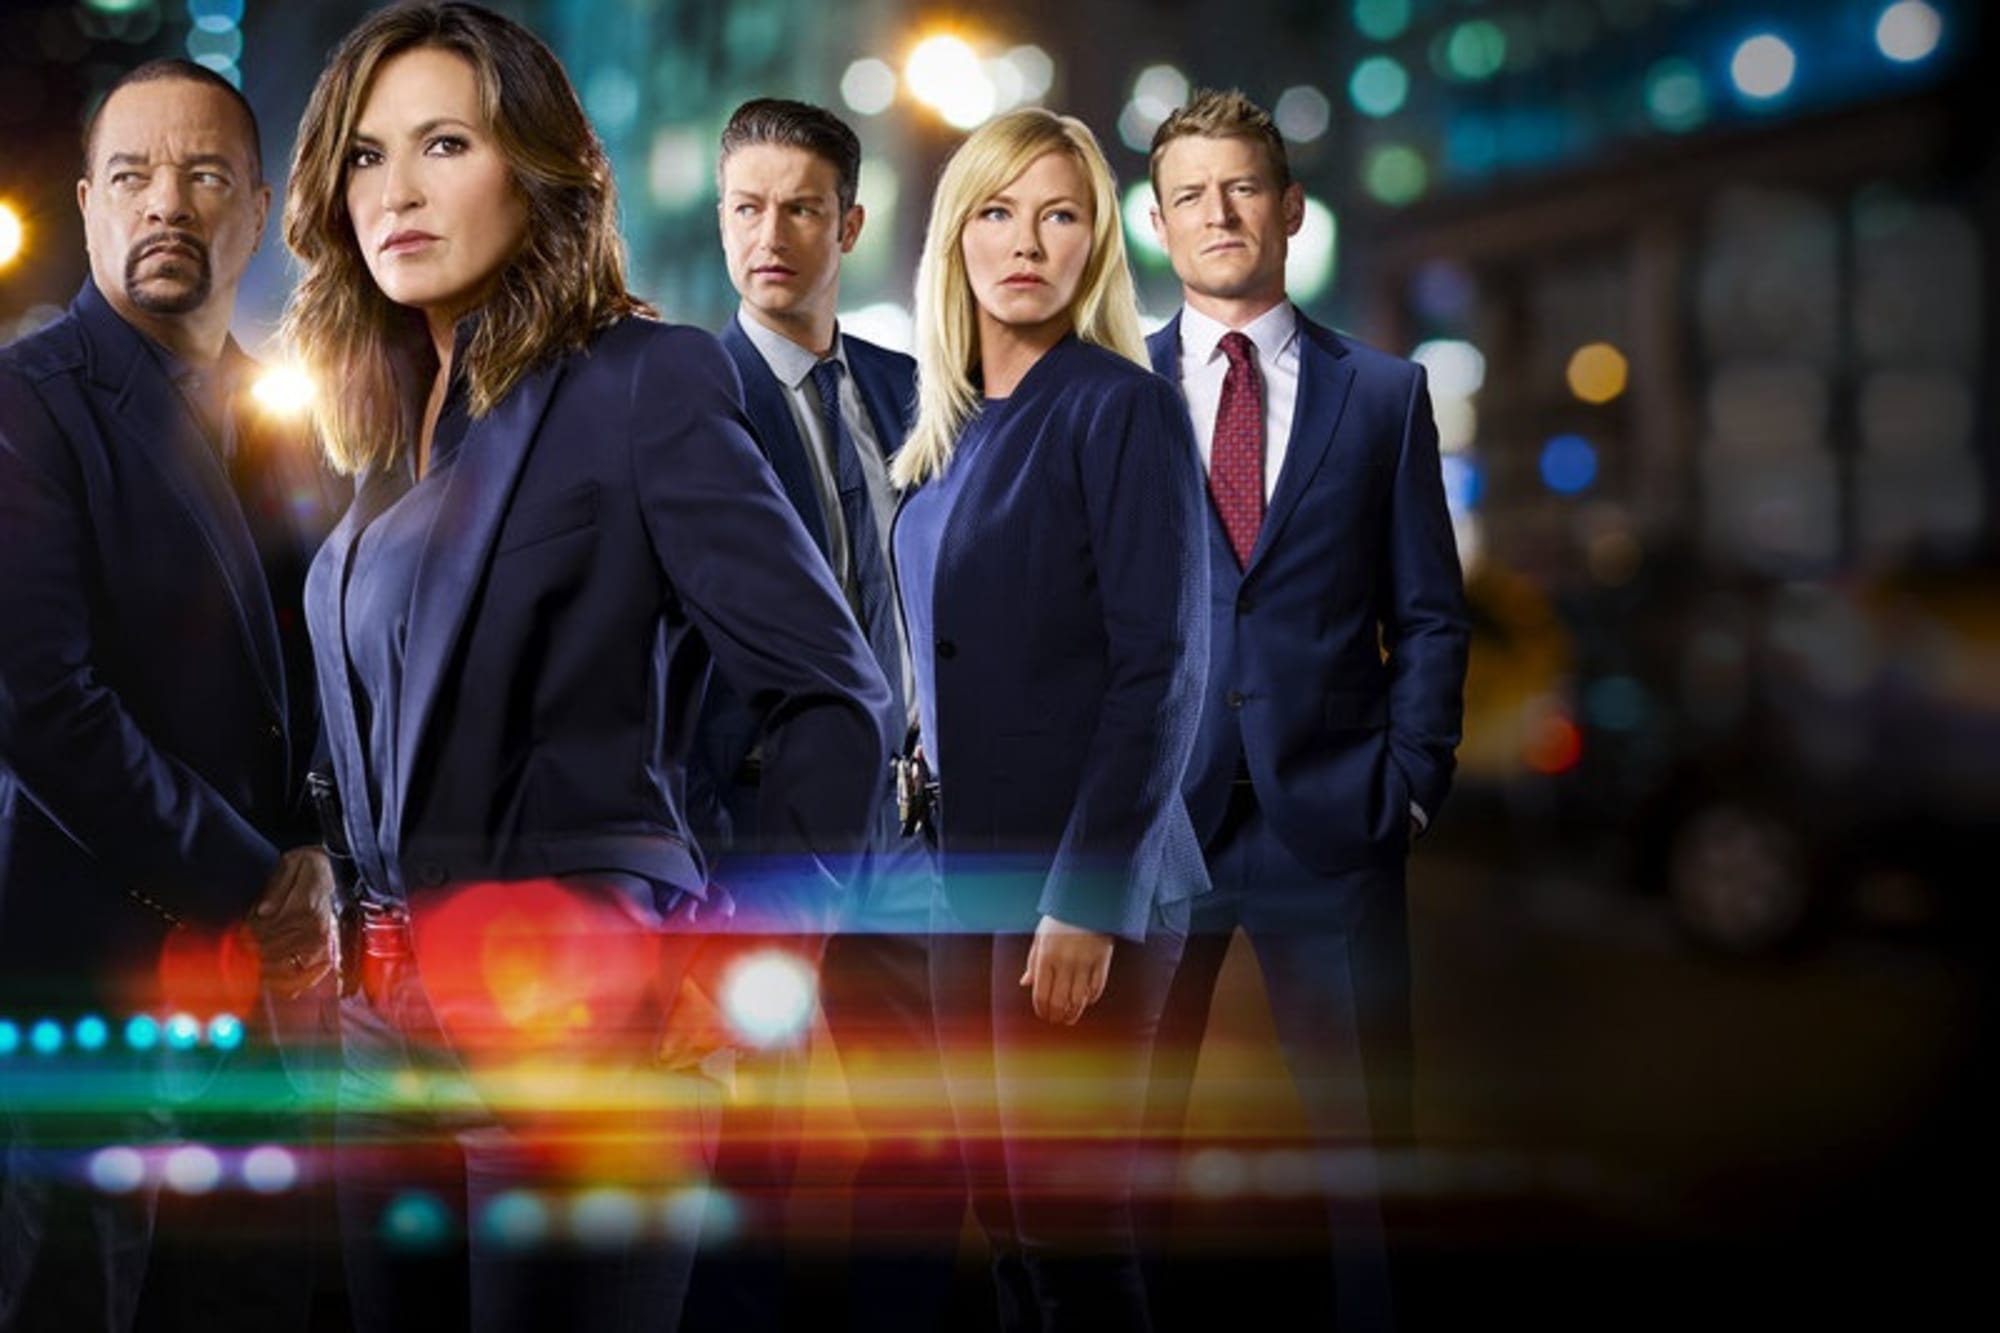 law-and-order-svu-renewed-for-season-20-what-we-know